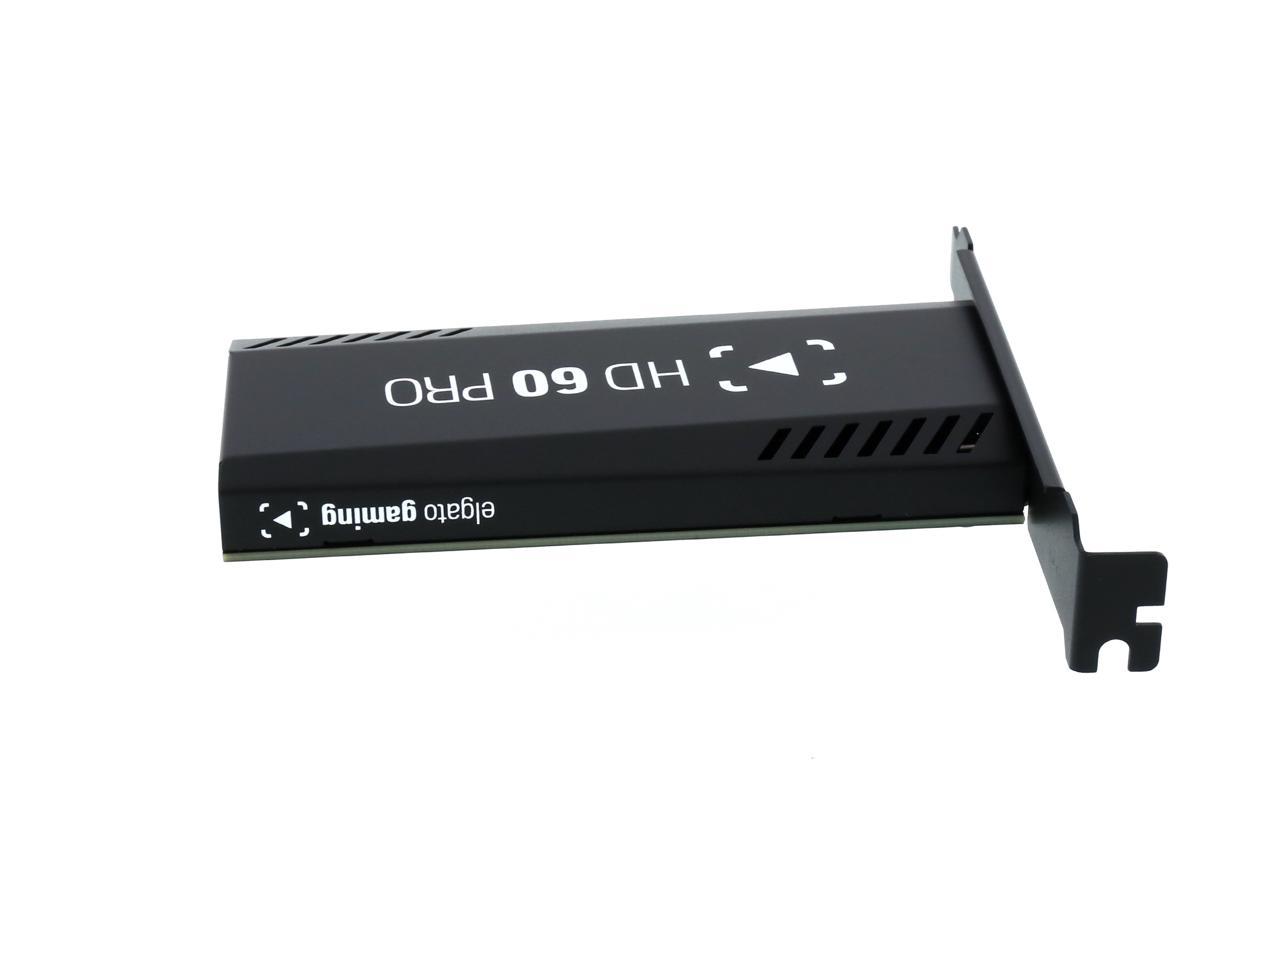 Elgato Game Capture Hd60 Pro Pcie Capture Card Stream And